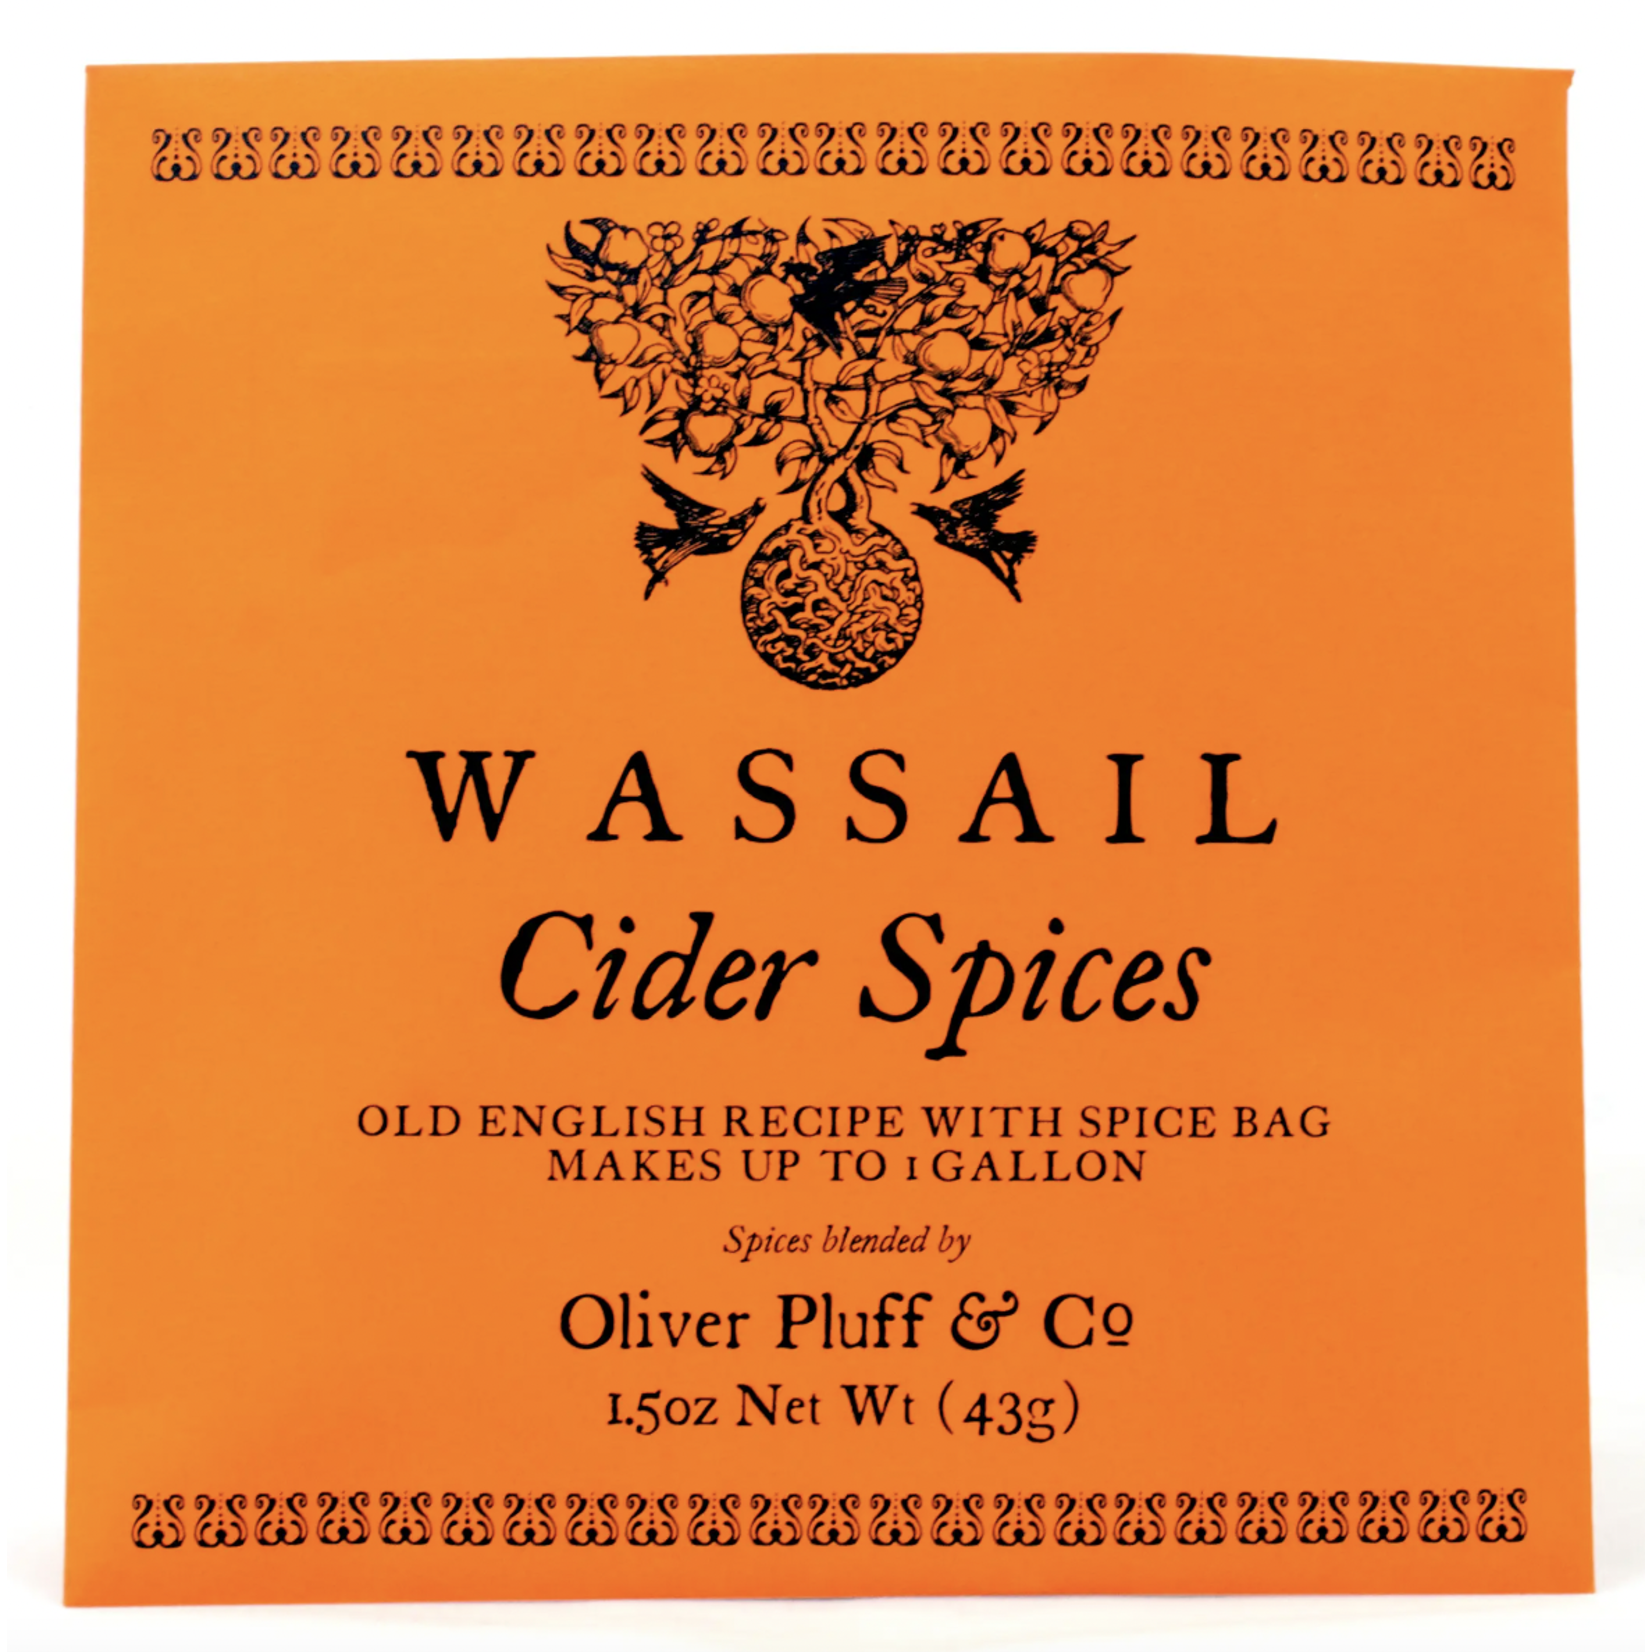 Oliver Pluff & Company Cider Spices Wassail - 1 Gallon Package